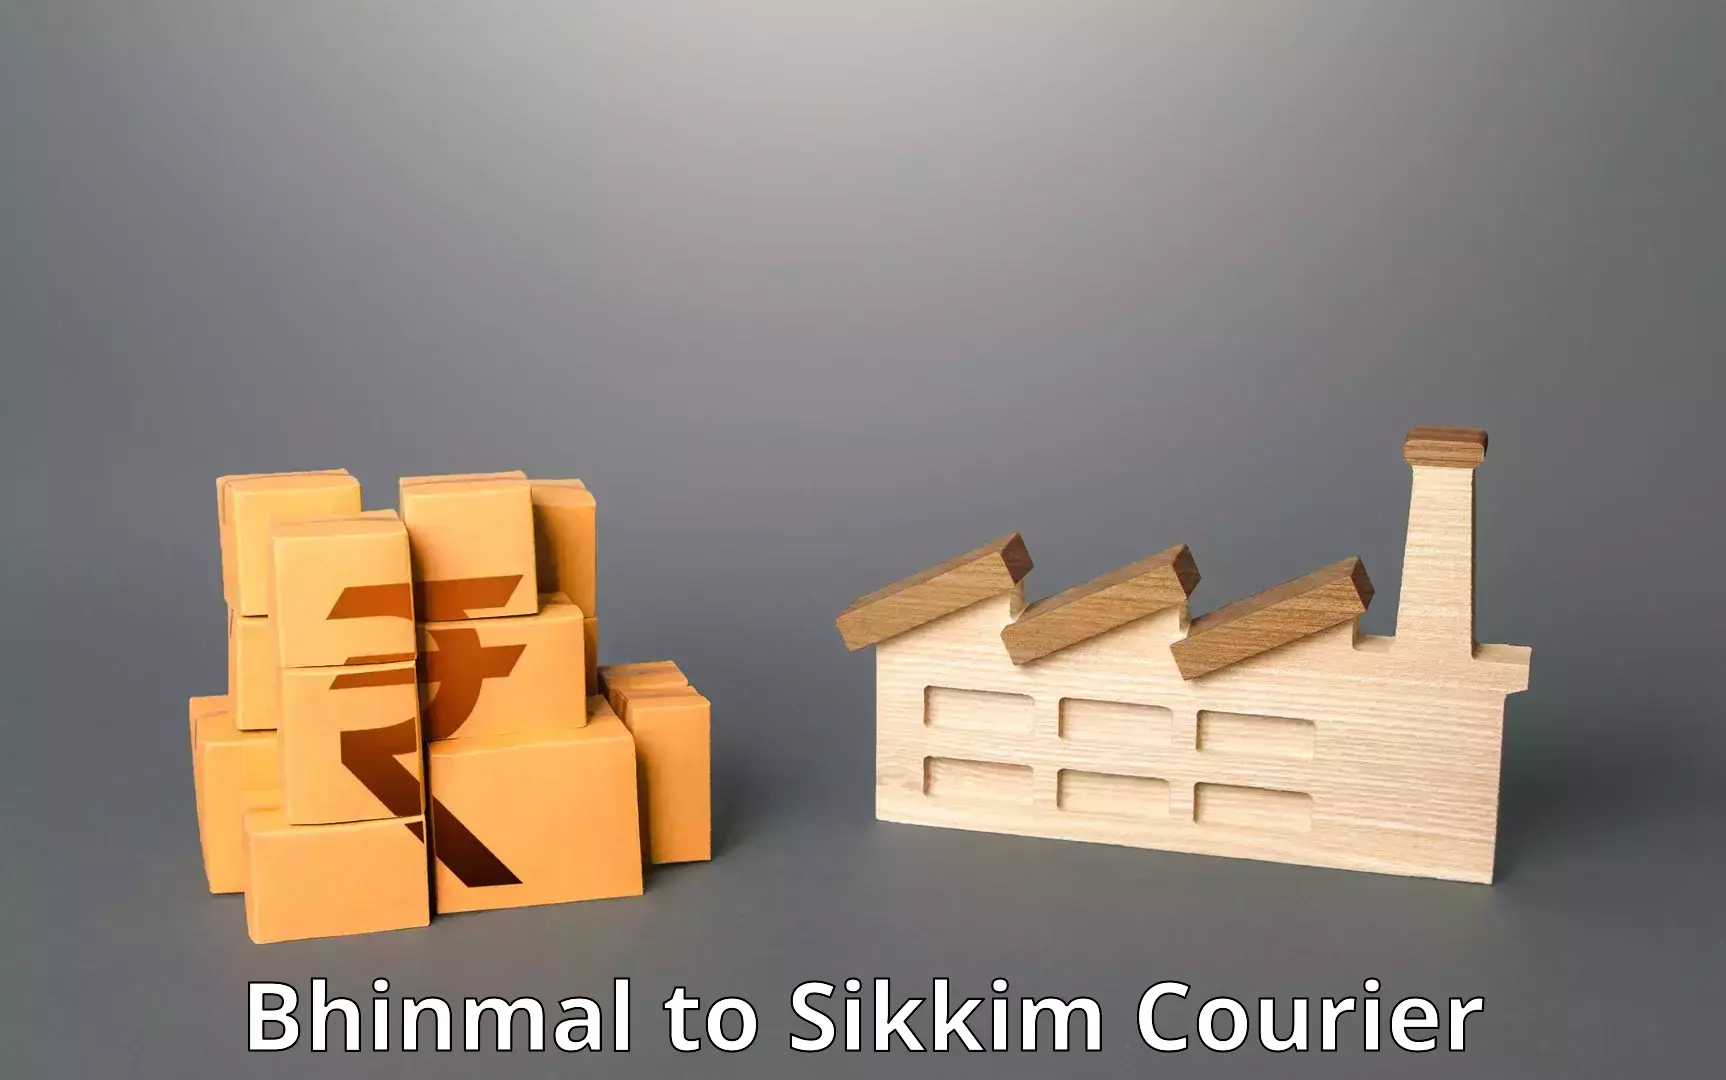 Global shipping networks Bhinmal to North Sikkim